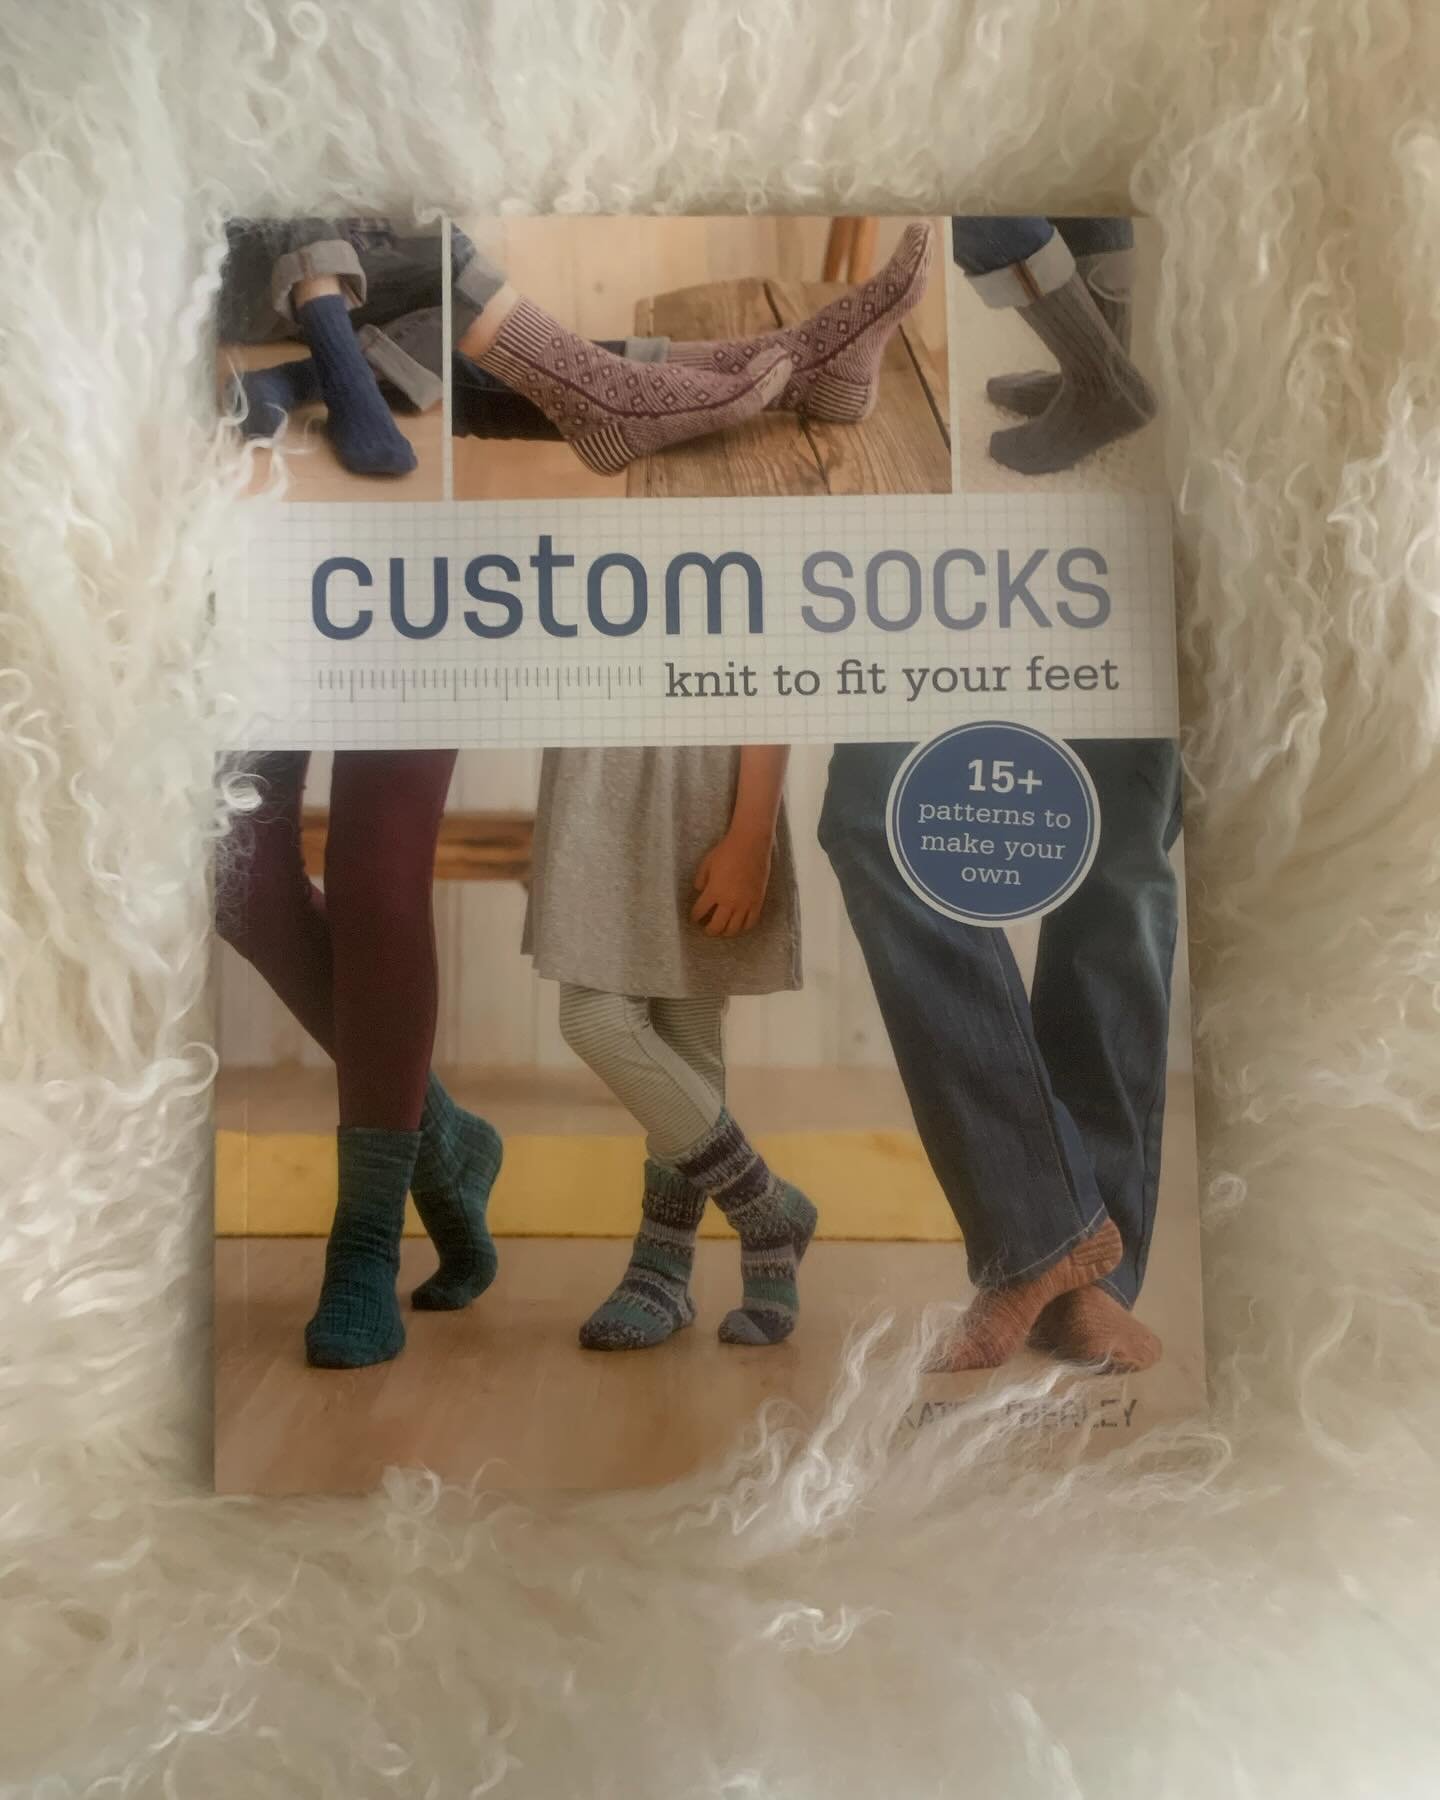 If you don&rsquo;t have this book, you may want to check it out. I love sock knitting and @kateatherleyknits has answered many of my questions. Call to hold your copy. 970-407-1461. #sock  #socks  #sockknitting  #sockknittersofinstagram  #makers #doe